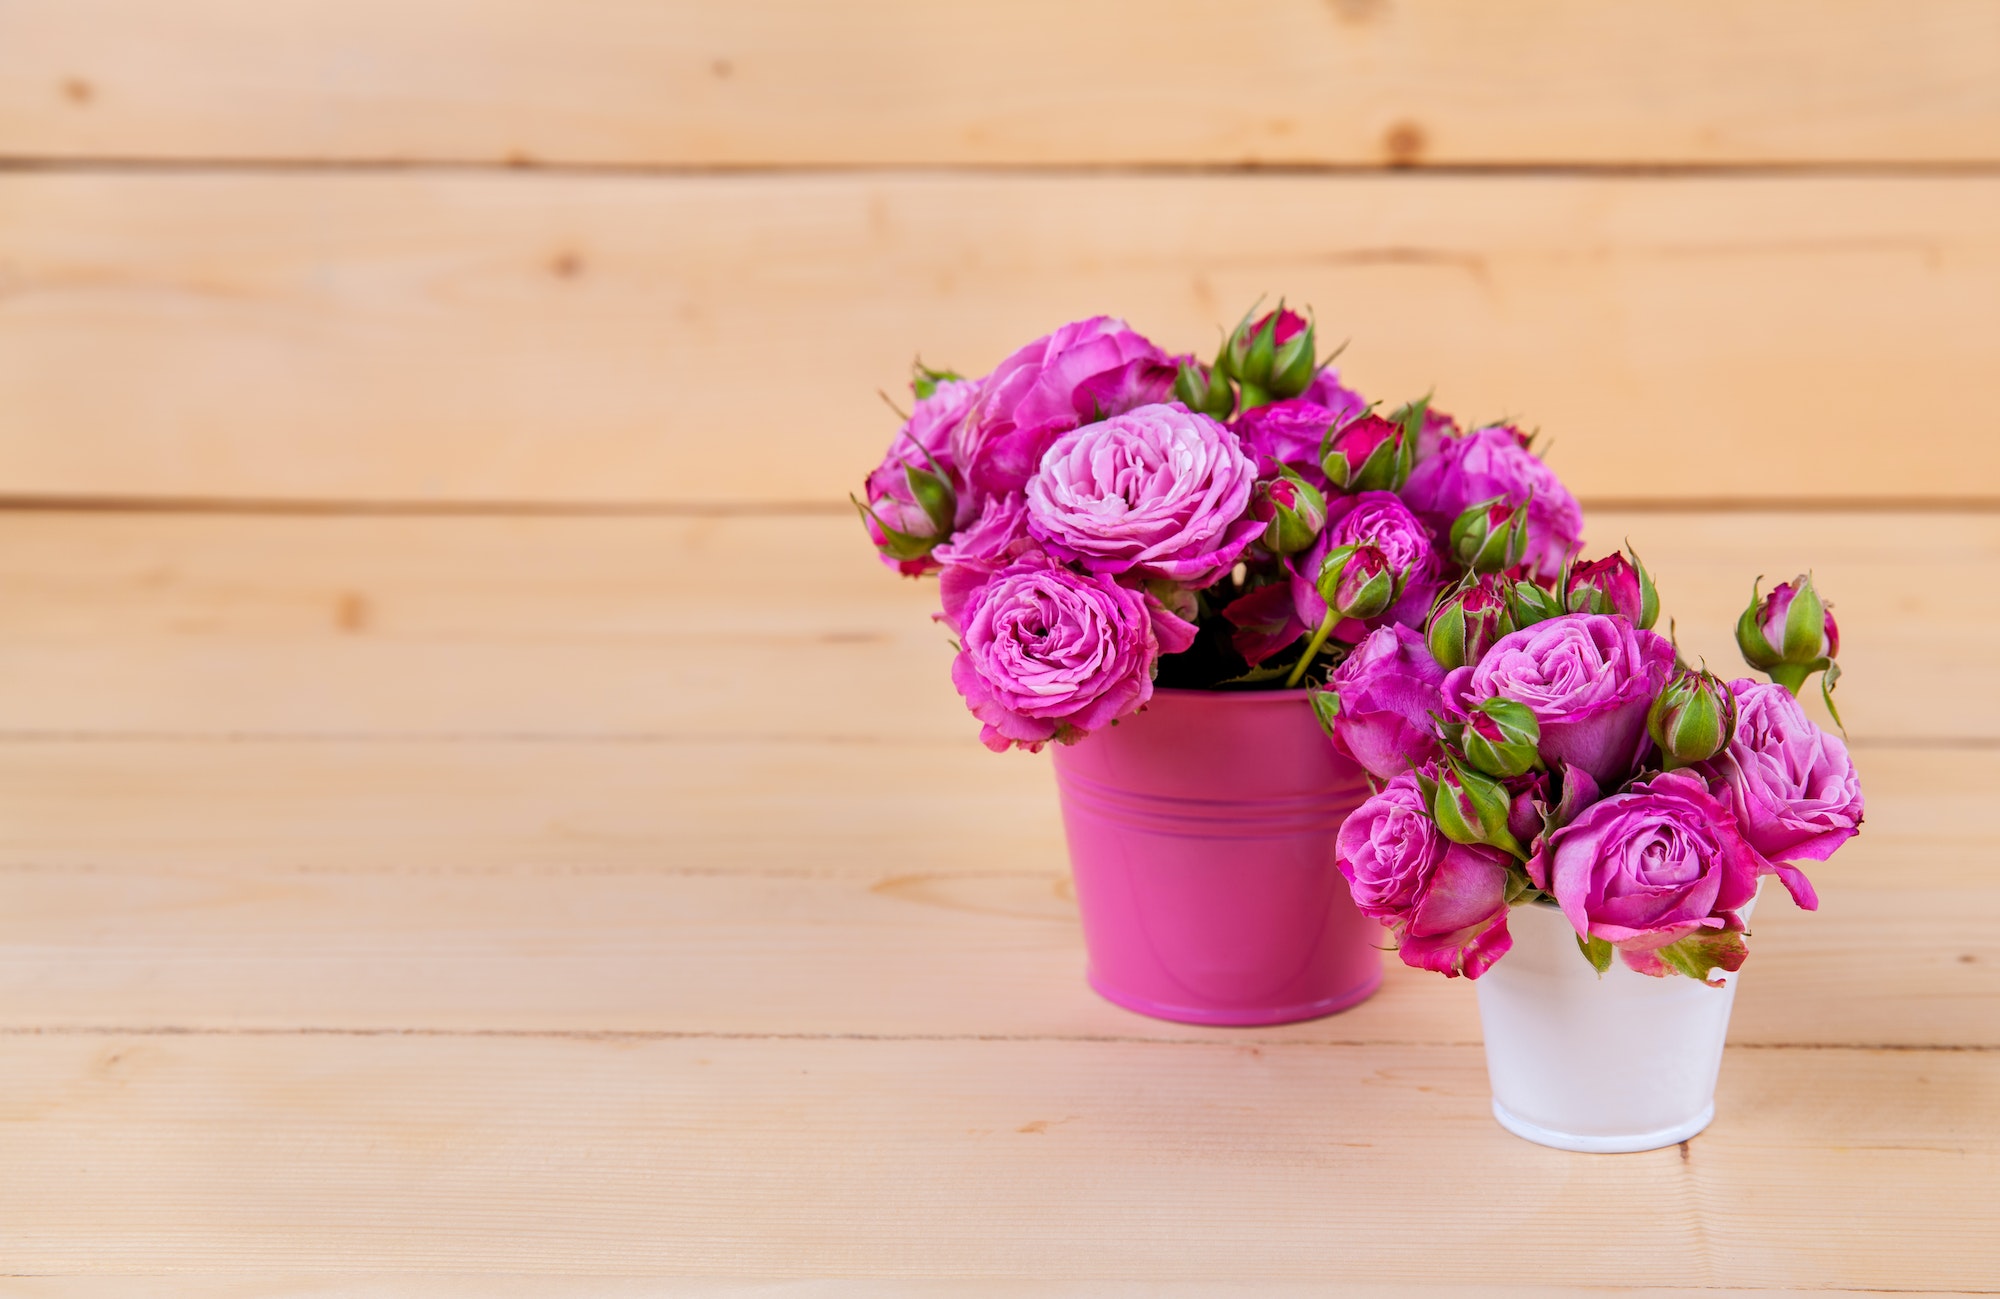 Pink roses in a vase on wooden background